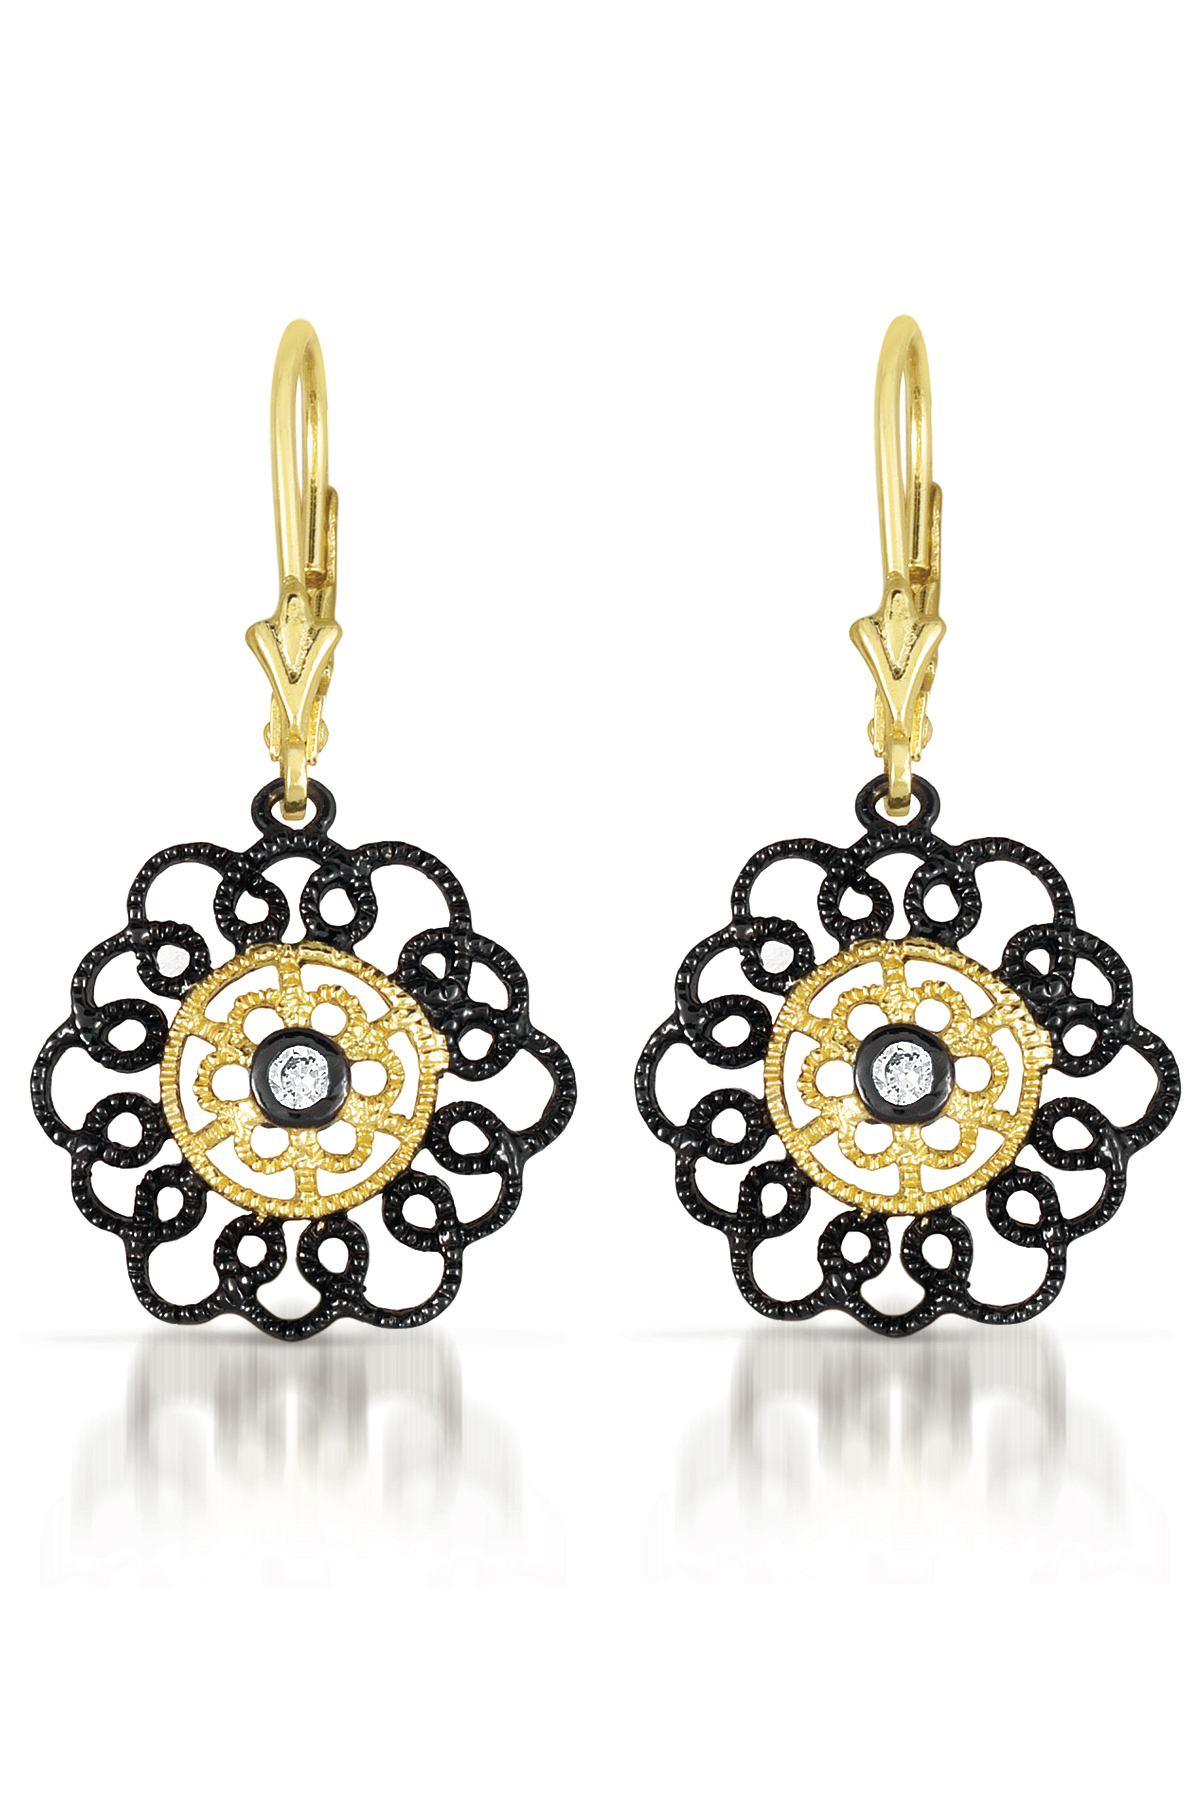 Cubic Zirconia (.925) Sterling Silver Black And Gold Plated Lace Flower Euro Earrings